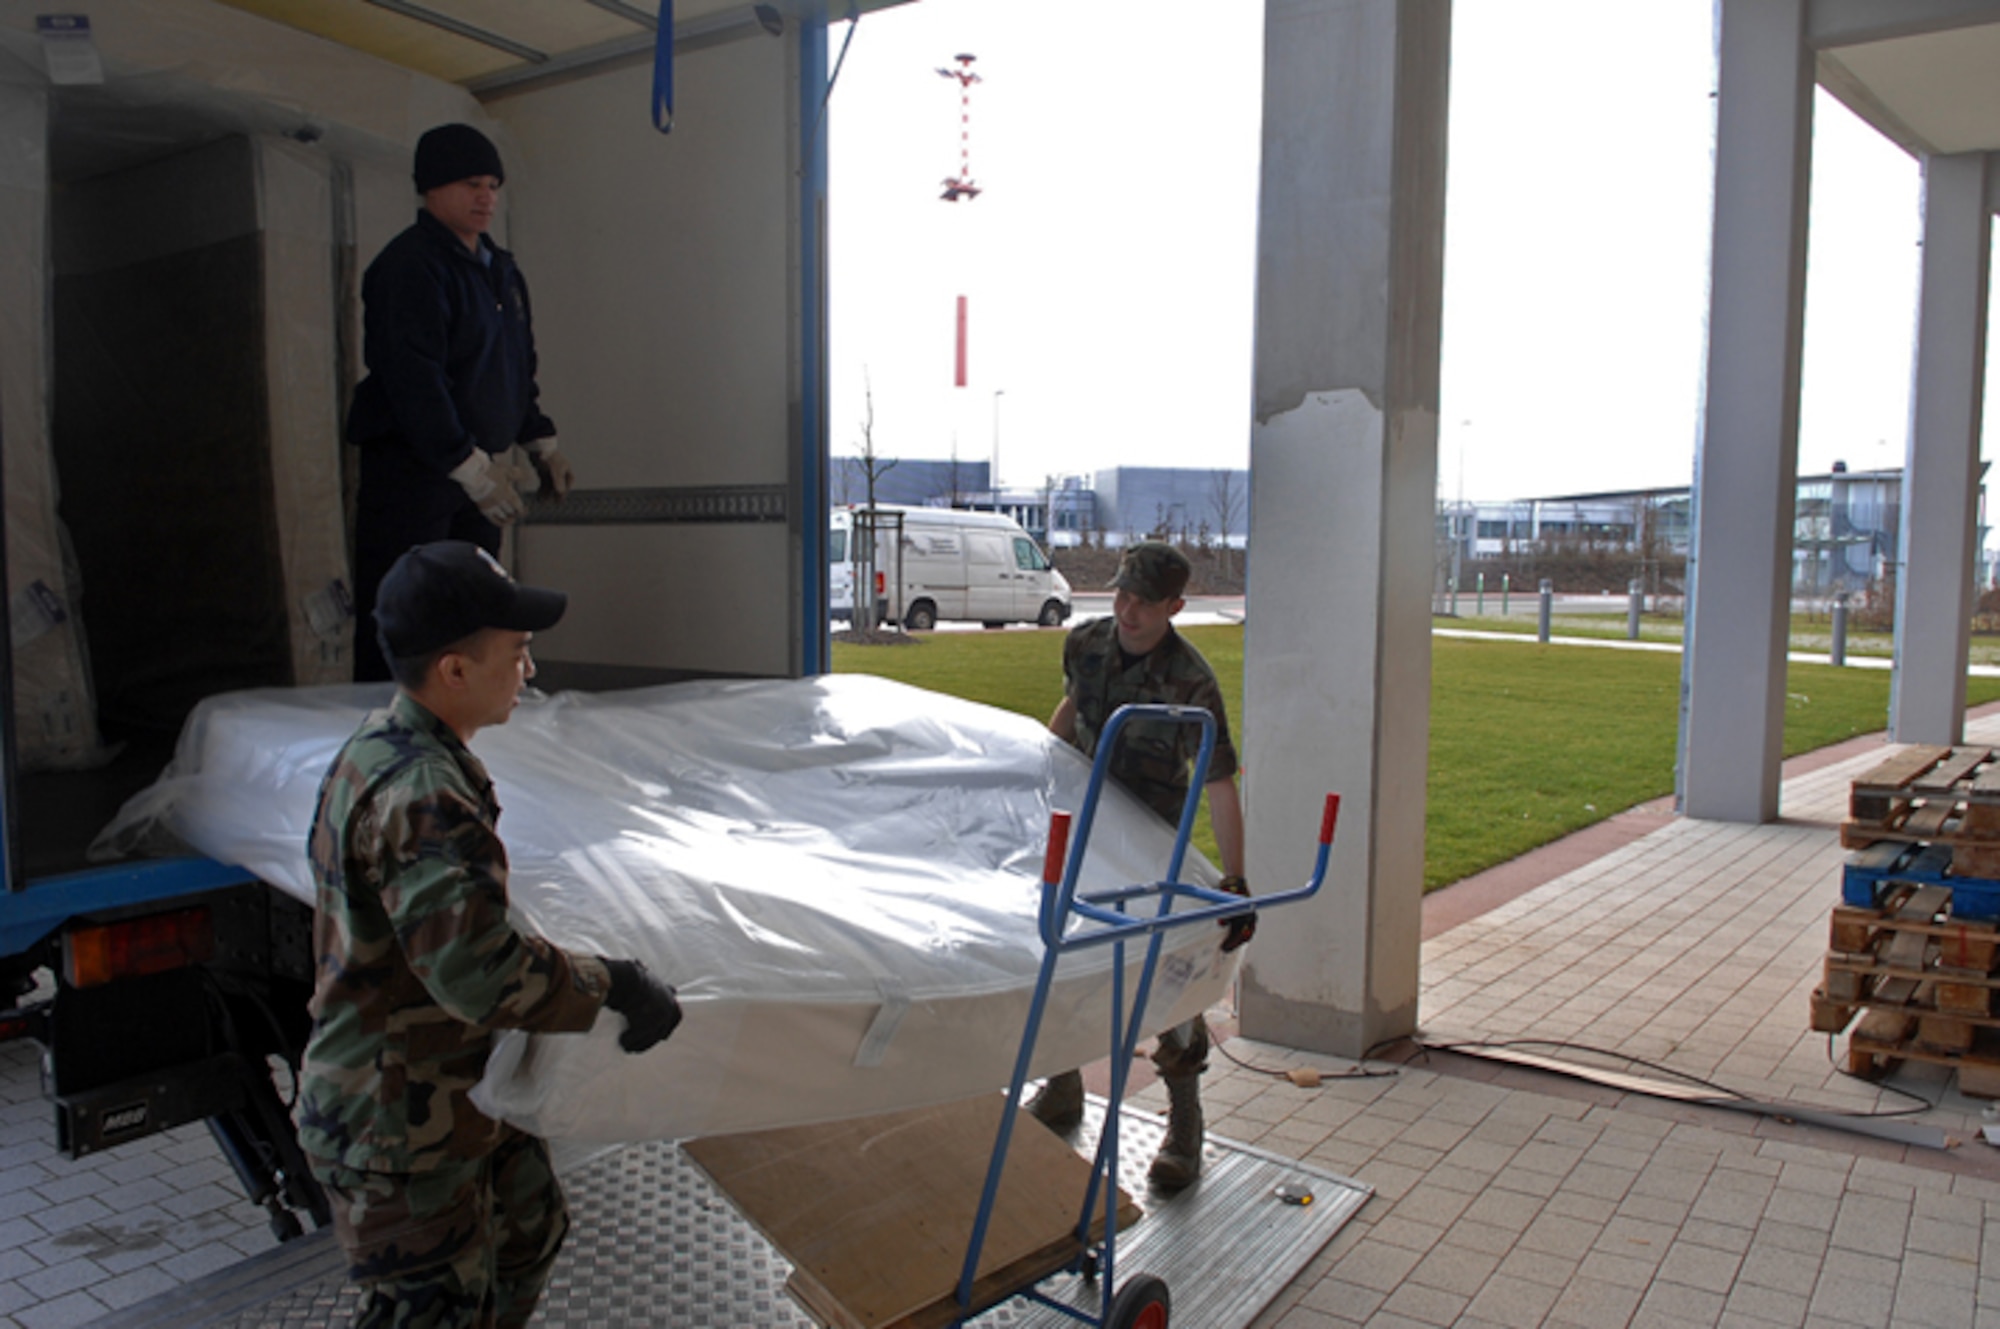 Hector Martinez, Air Force Inns Material Handler, Airmen 1st Class Byron Sy(left) and Allen Long, 435th Services Squadron, offload mattresses for the new visitor quarters at the Kaiserslautern Military Community Center on Ramstein Air Base. The eight-story, 350-room visiting quarters facility will be one of the first areas to open as part of a $170 million project that will offer approximately 844,000 square feet of lodging, shopping and entertainment under one roof. (U.S. Air Force photo by Airman 1st Class Tony Ritter)
